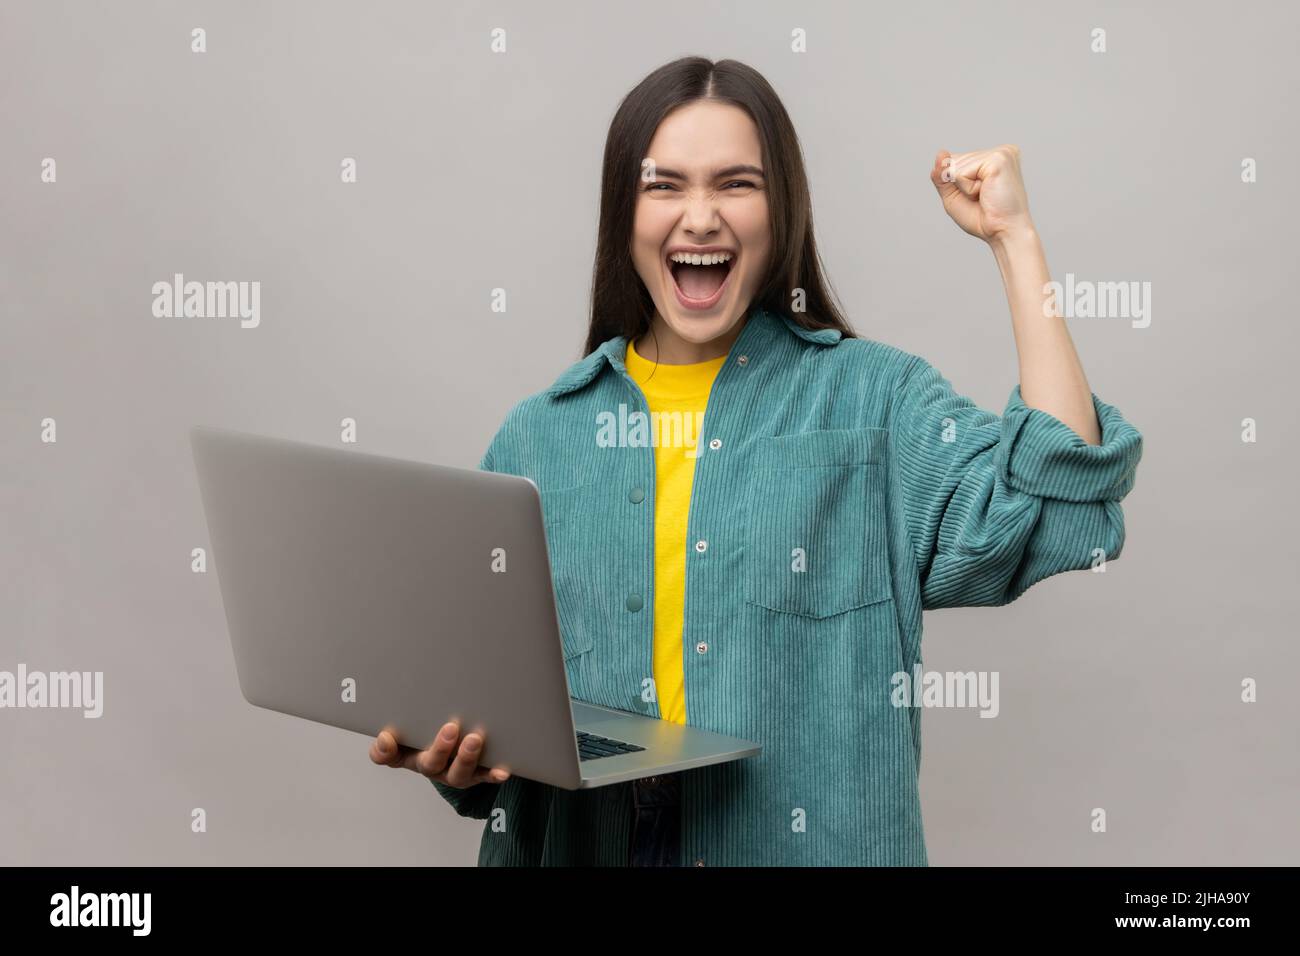 Extremely happy woman standing with laptop and clenching her fist, celebrating success, yelling happily, wearing casual style jacket. Indoor studio shot isolated on gray background. Stock Photo